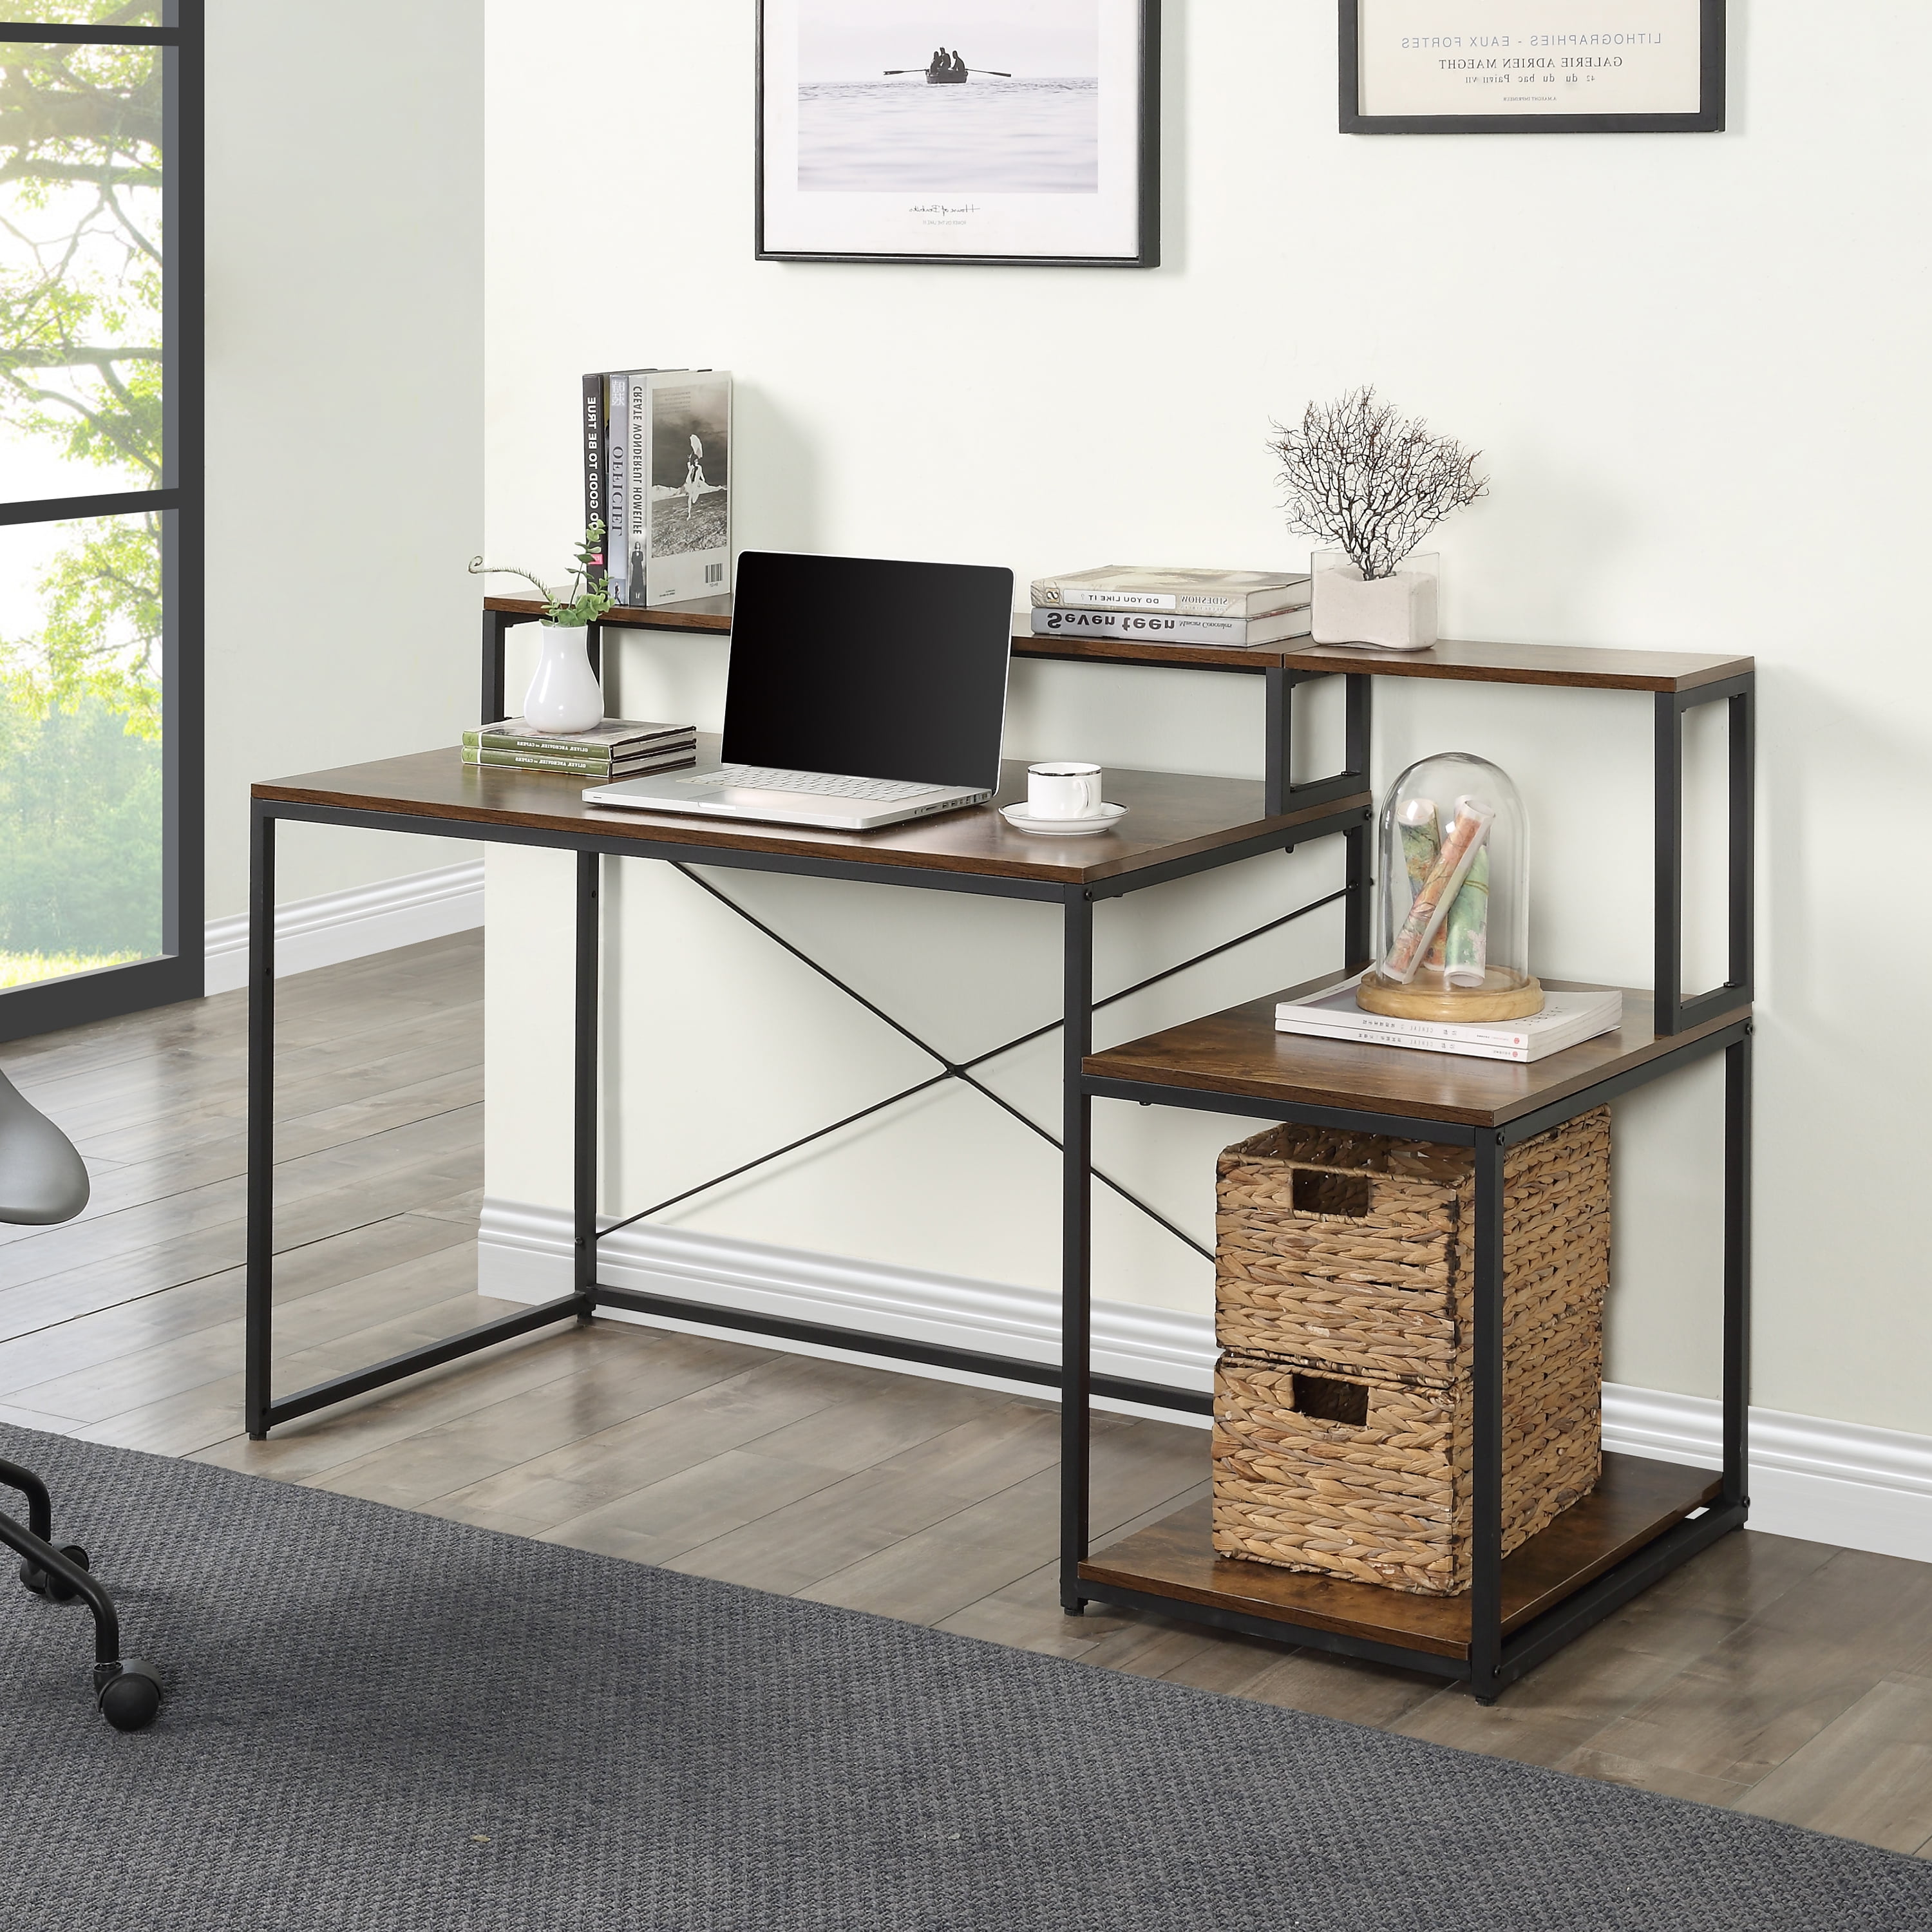 Details about   Wood Computer Desk Writing PC Laptop Table Workstation Study Shelf Home Office 